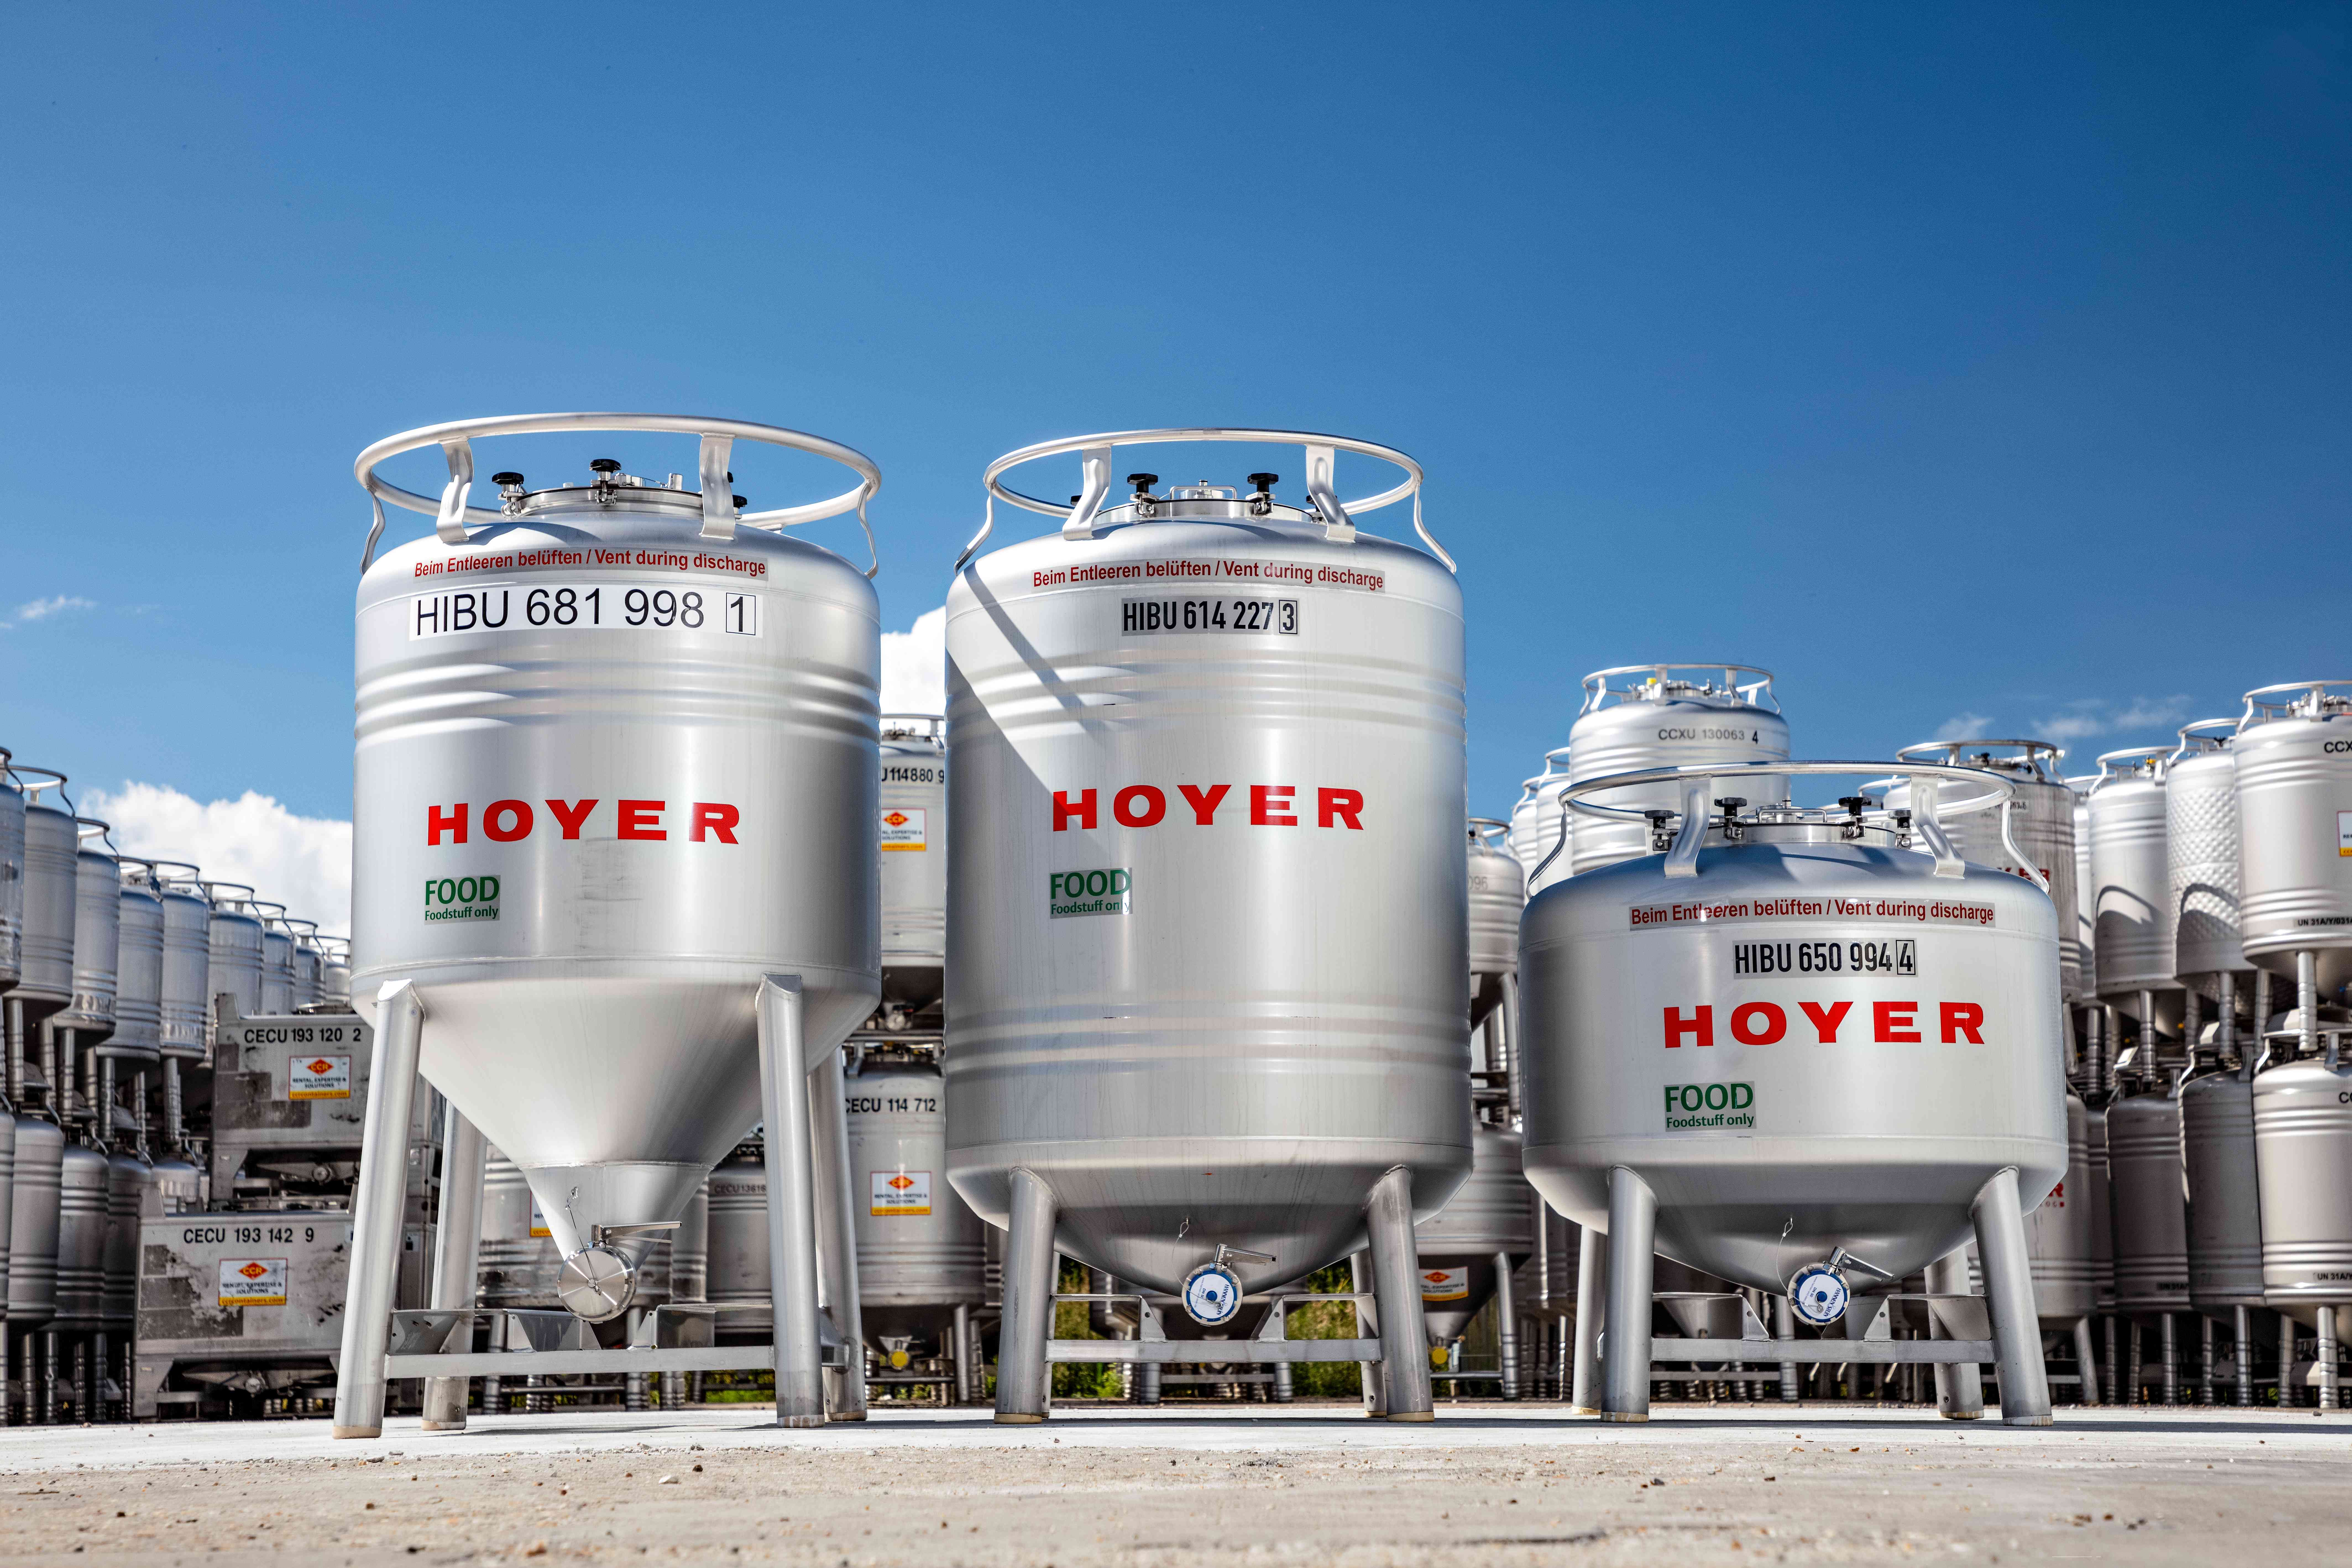 HOYER Group Intermediate Bulk Container (IBC) for foodstuffs